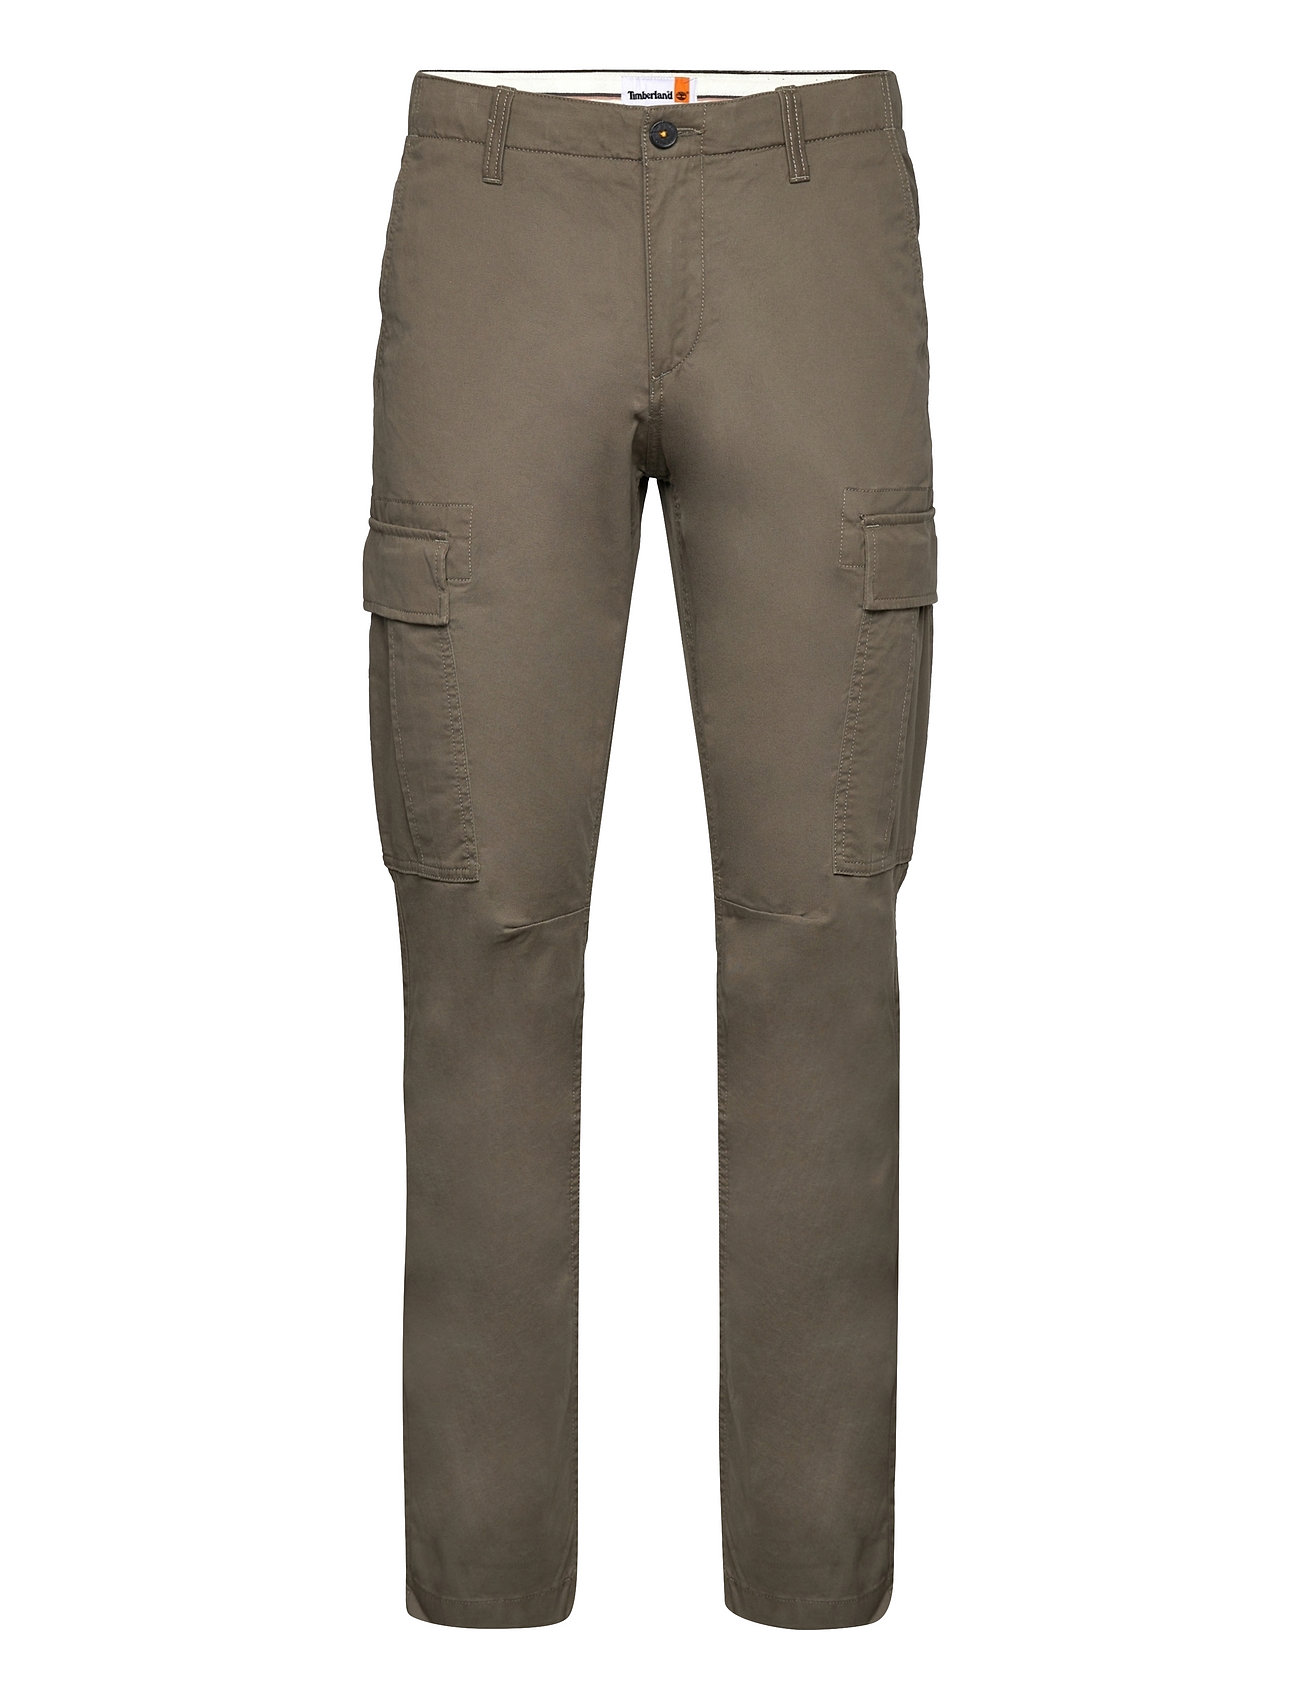 Timberland Men's profile lake relaxed tapered fit cargo pants, Men's  Fashion, Bottoms, Joggers on Carousell